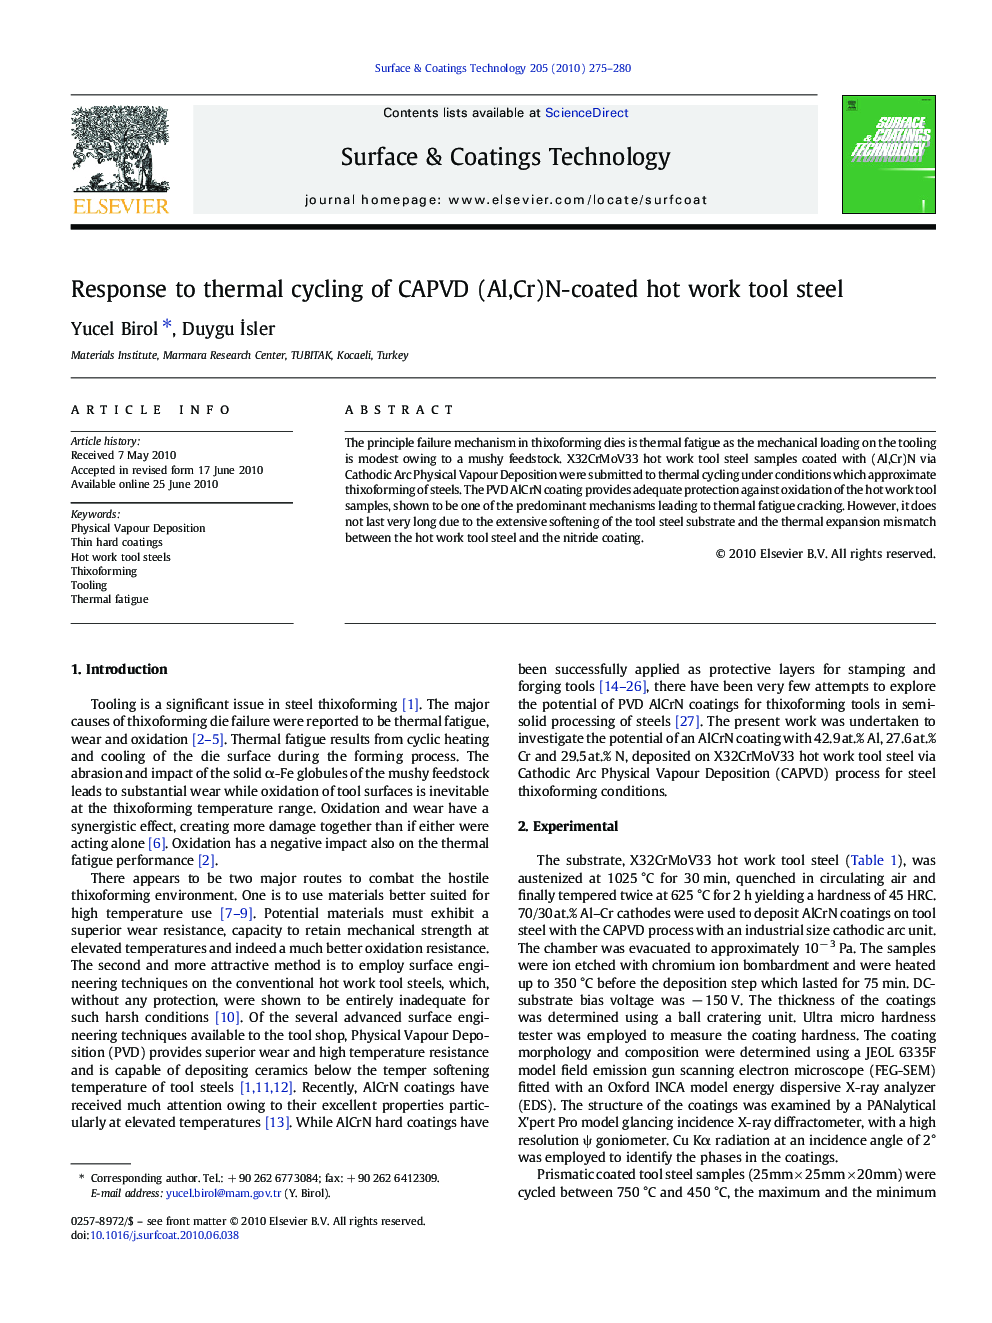 Response to thermal cycling of CAPVD (Al,Cr)N-coated hot work tool steel